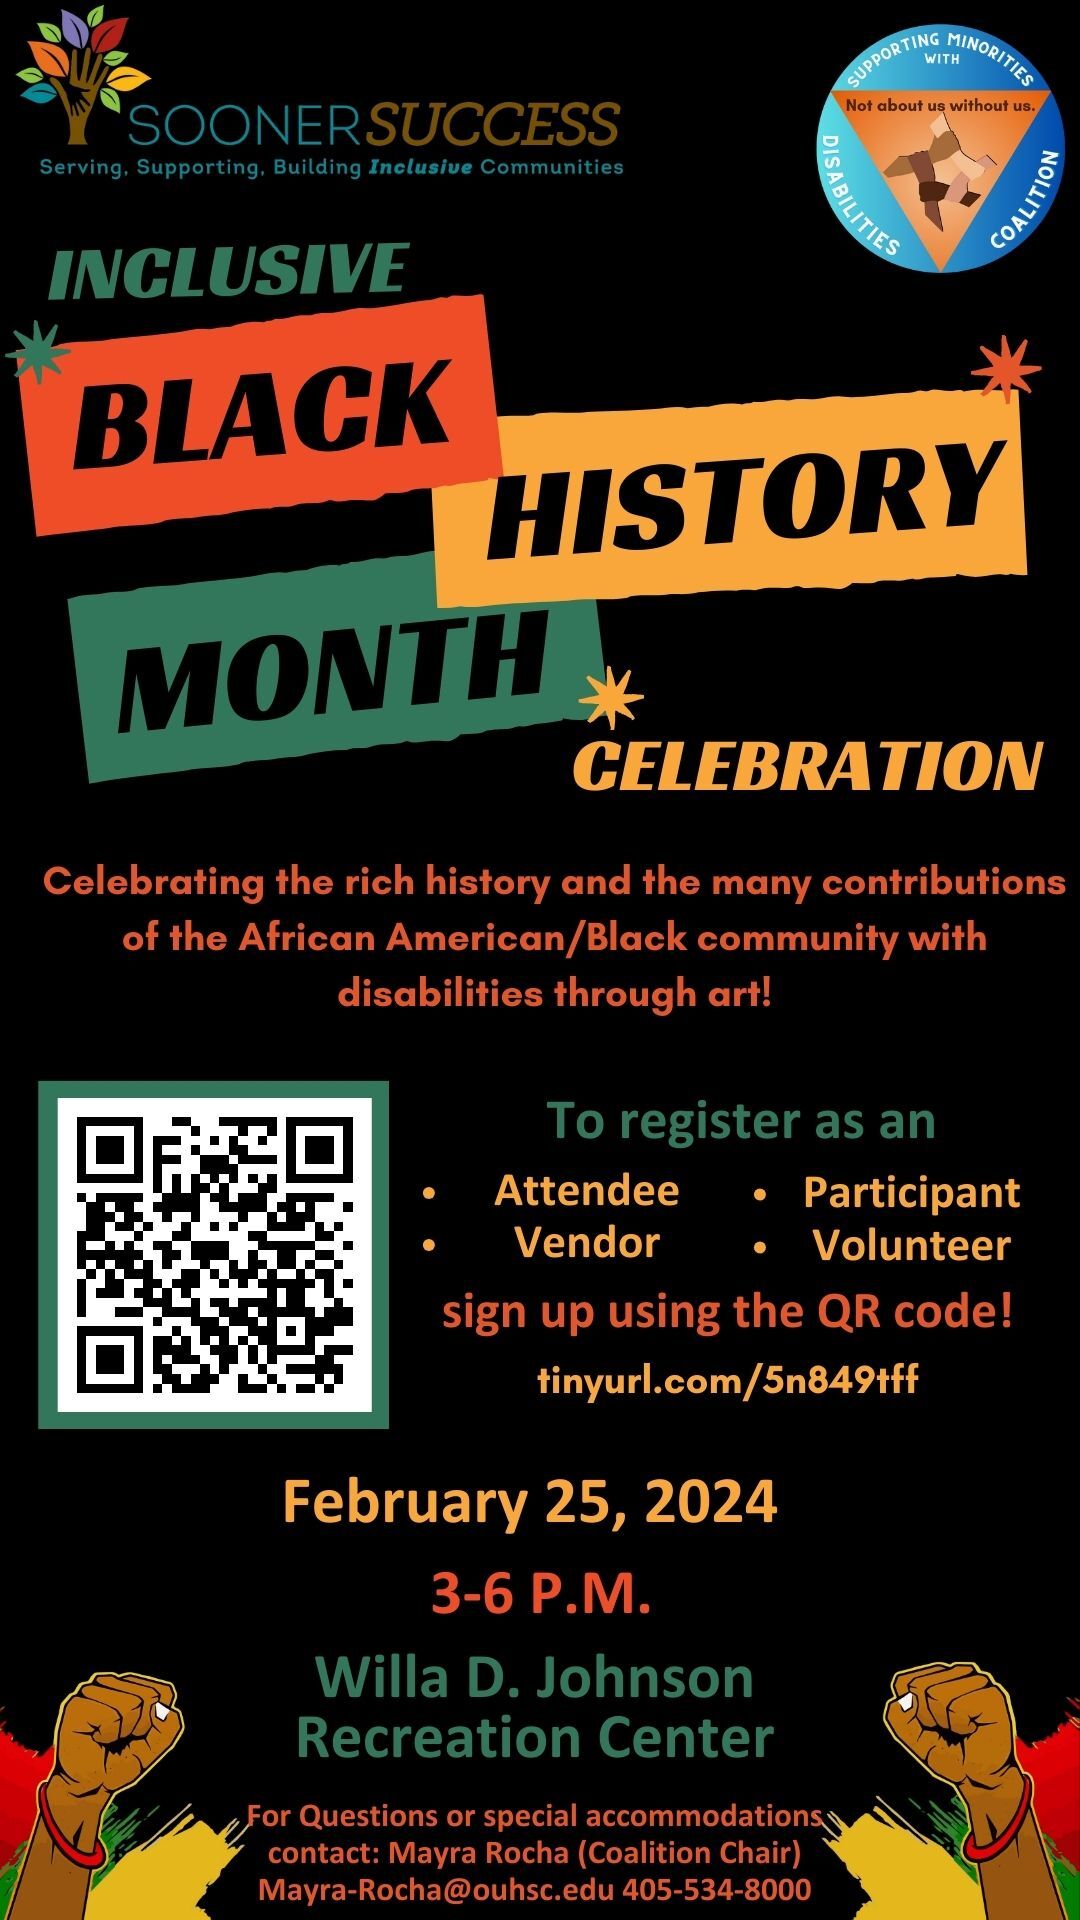 Flyer, Sooner Success Inclusive Black History Month Celebration; all information is article below